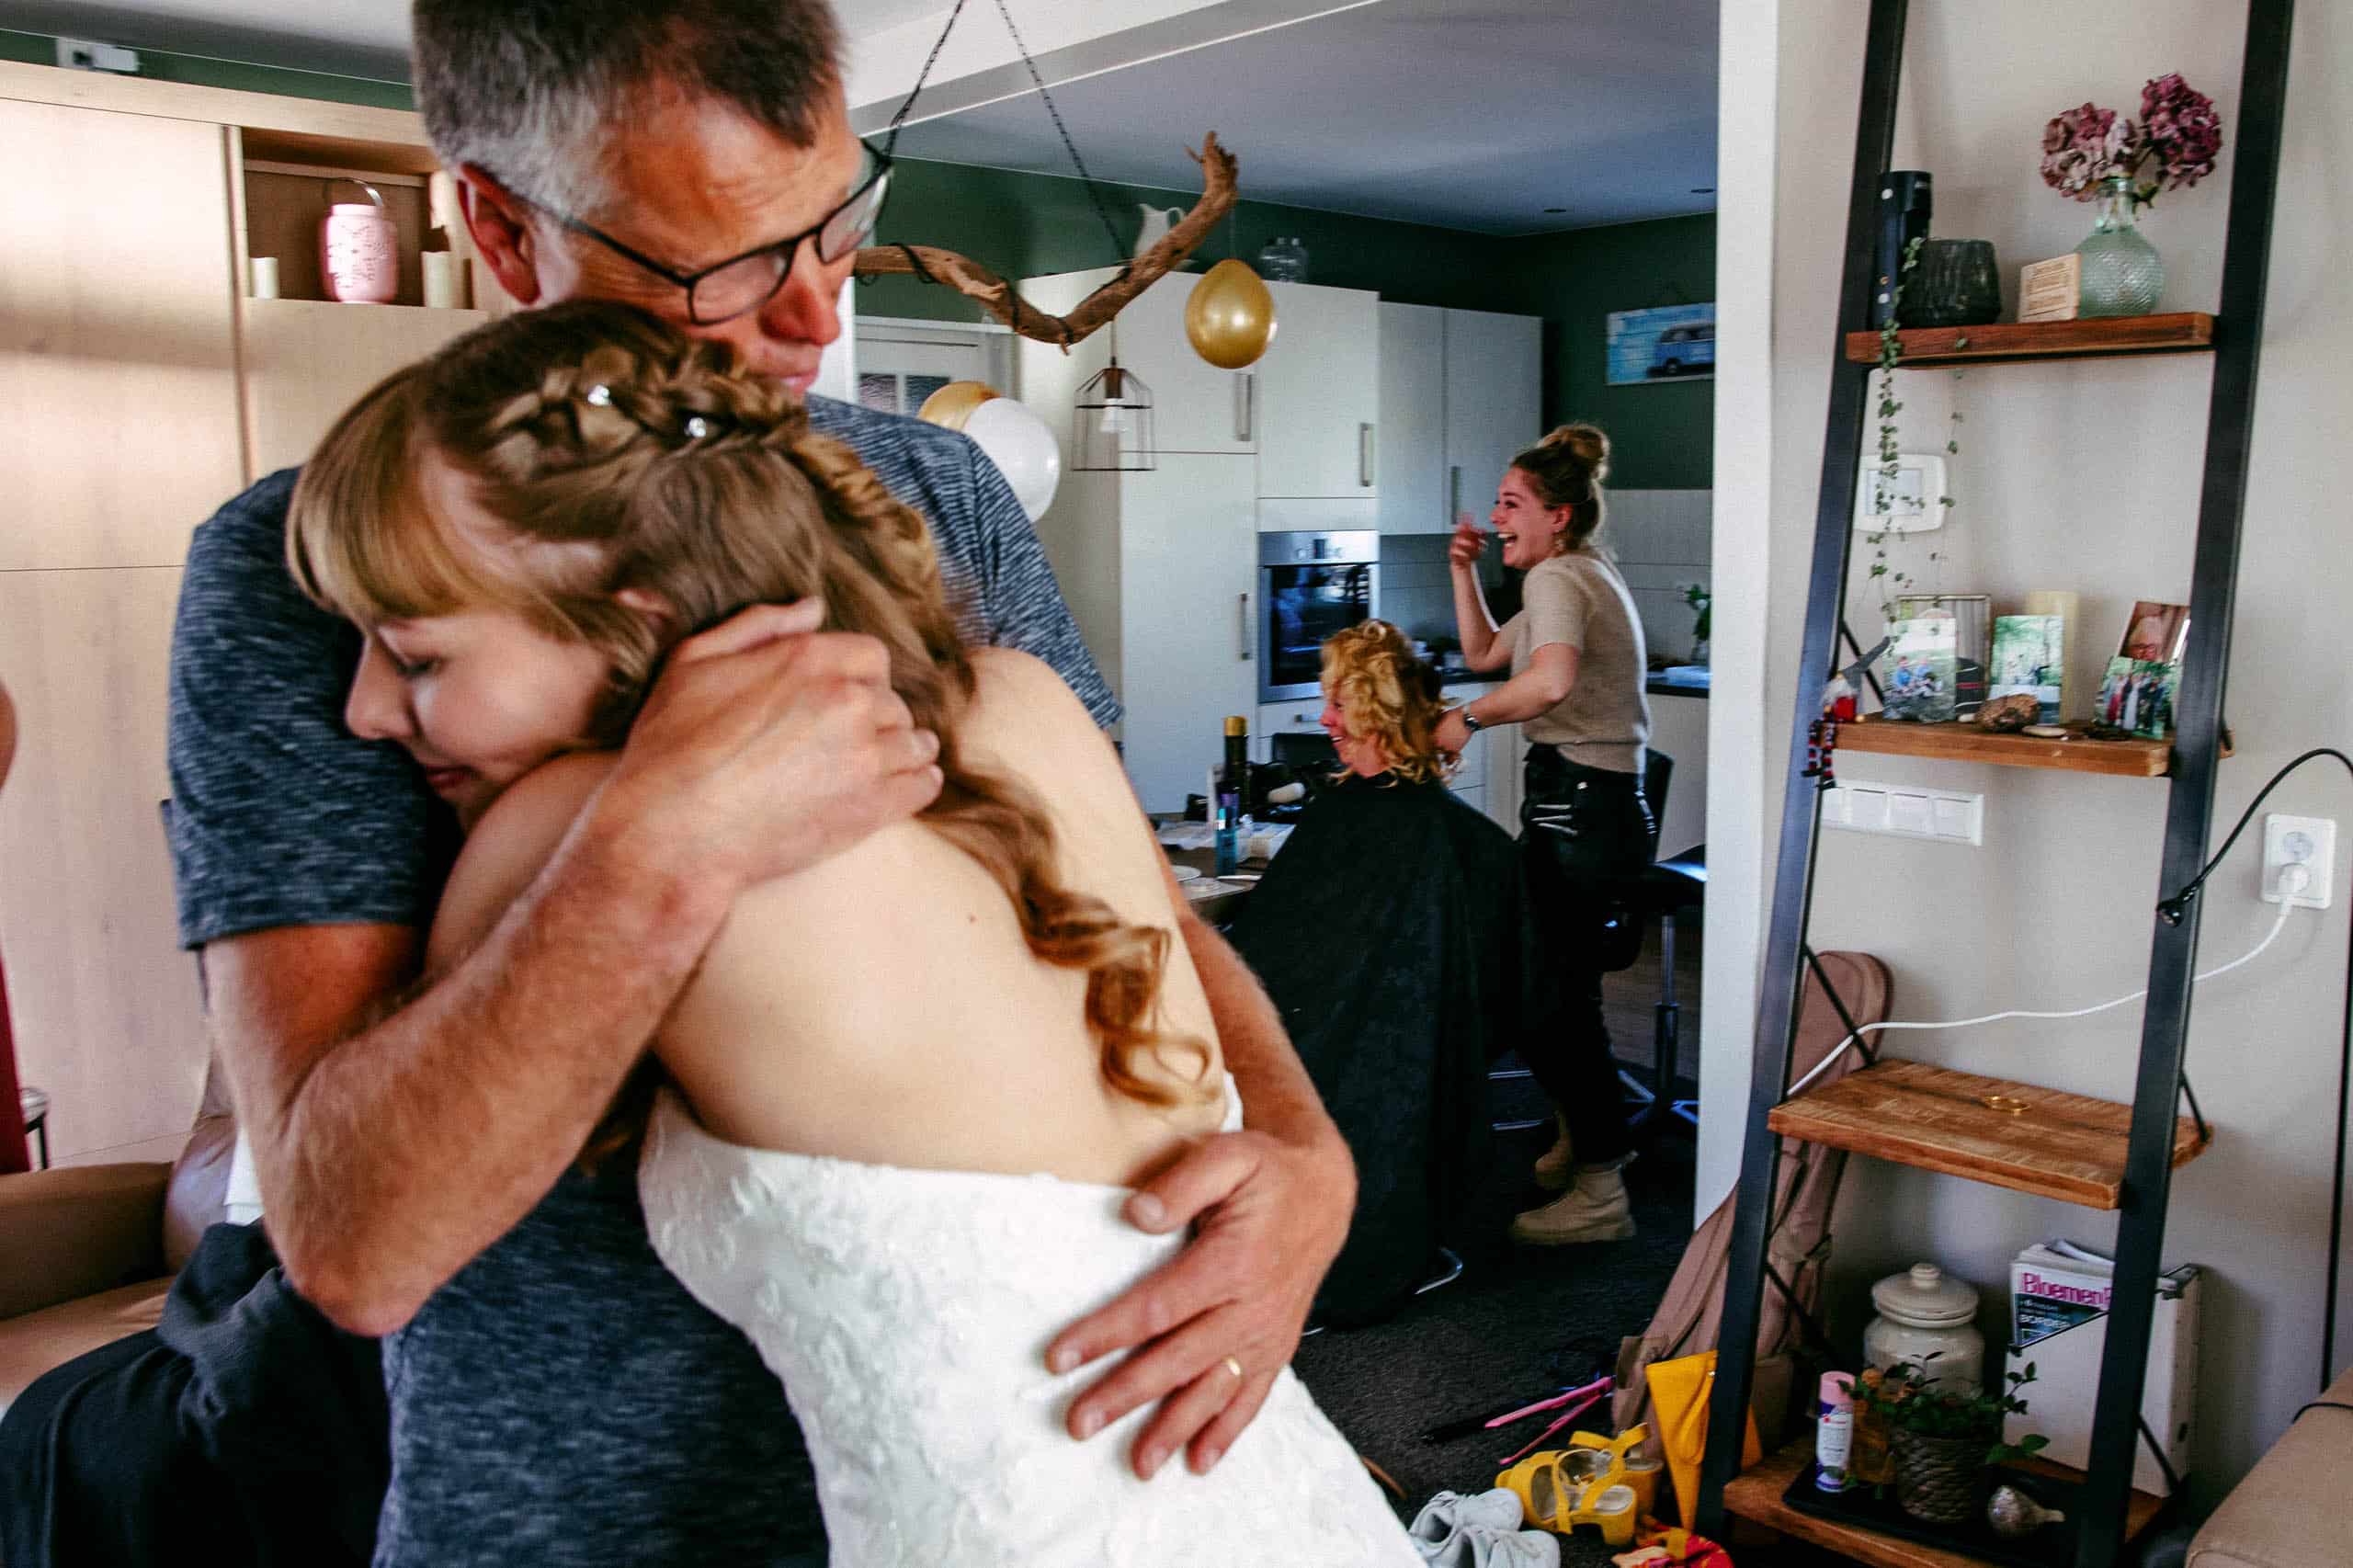 A bride hugs her father in the living room, capturing a heartfelt moment between them on their wedding day.